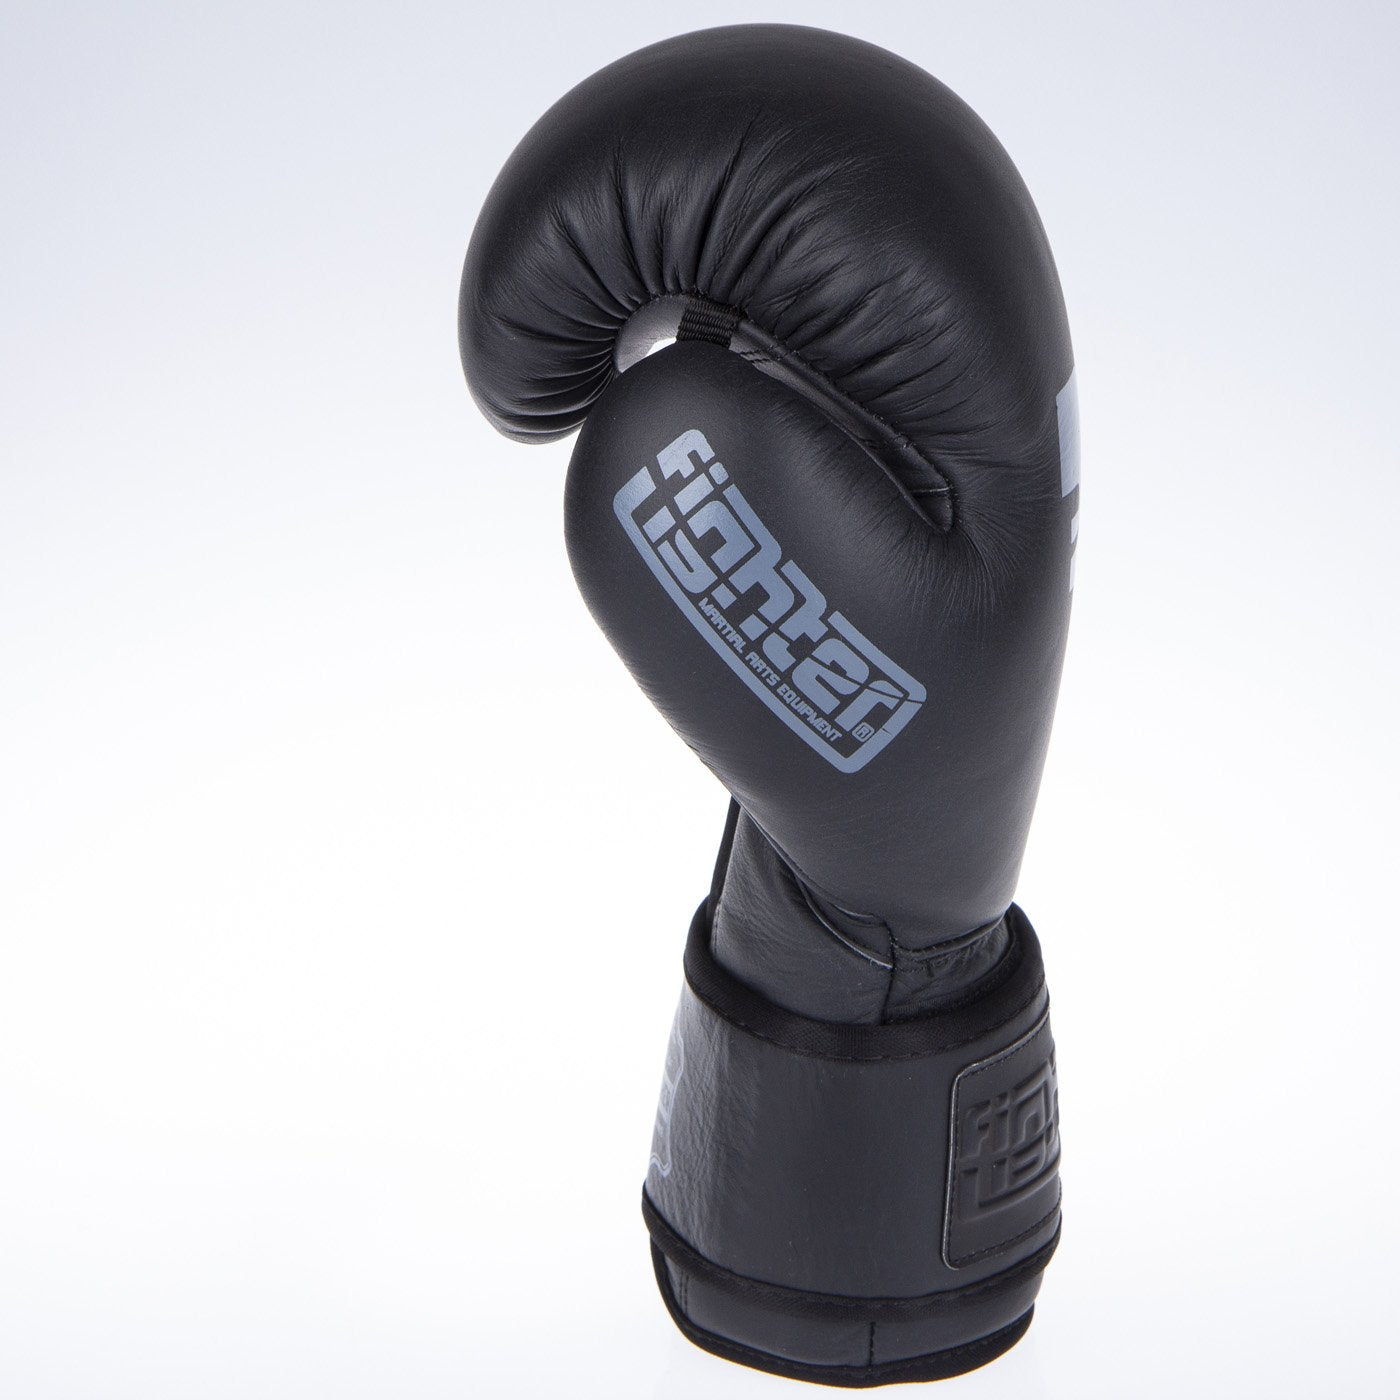 Fighter Boxing Gloves SIAM - black